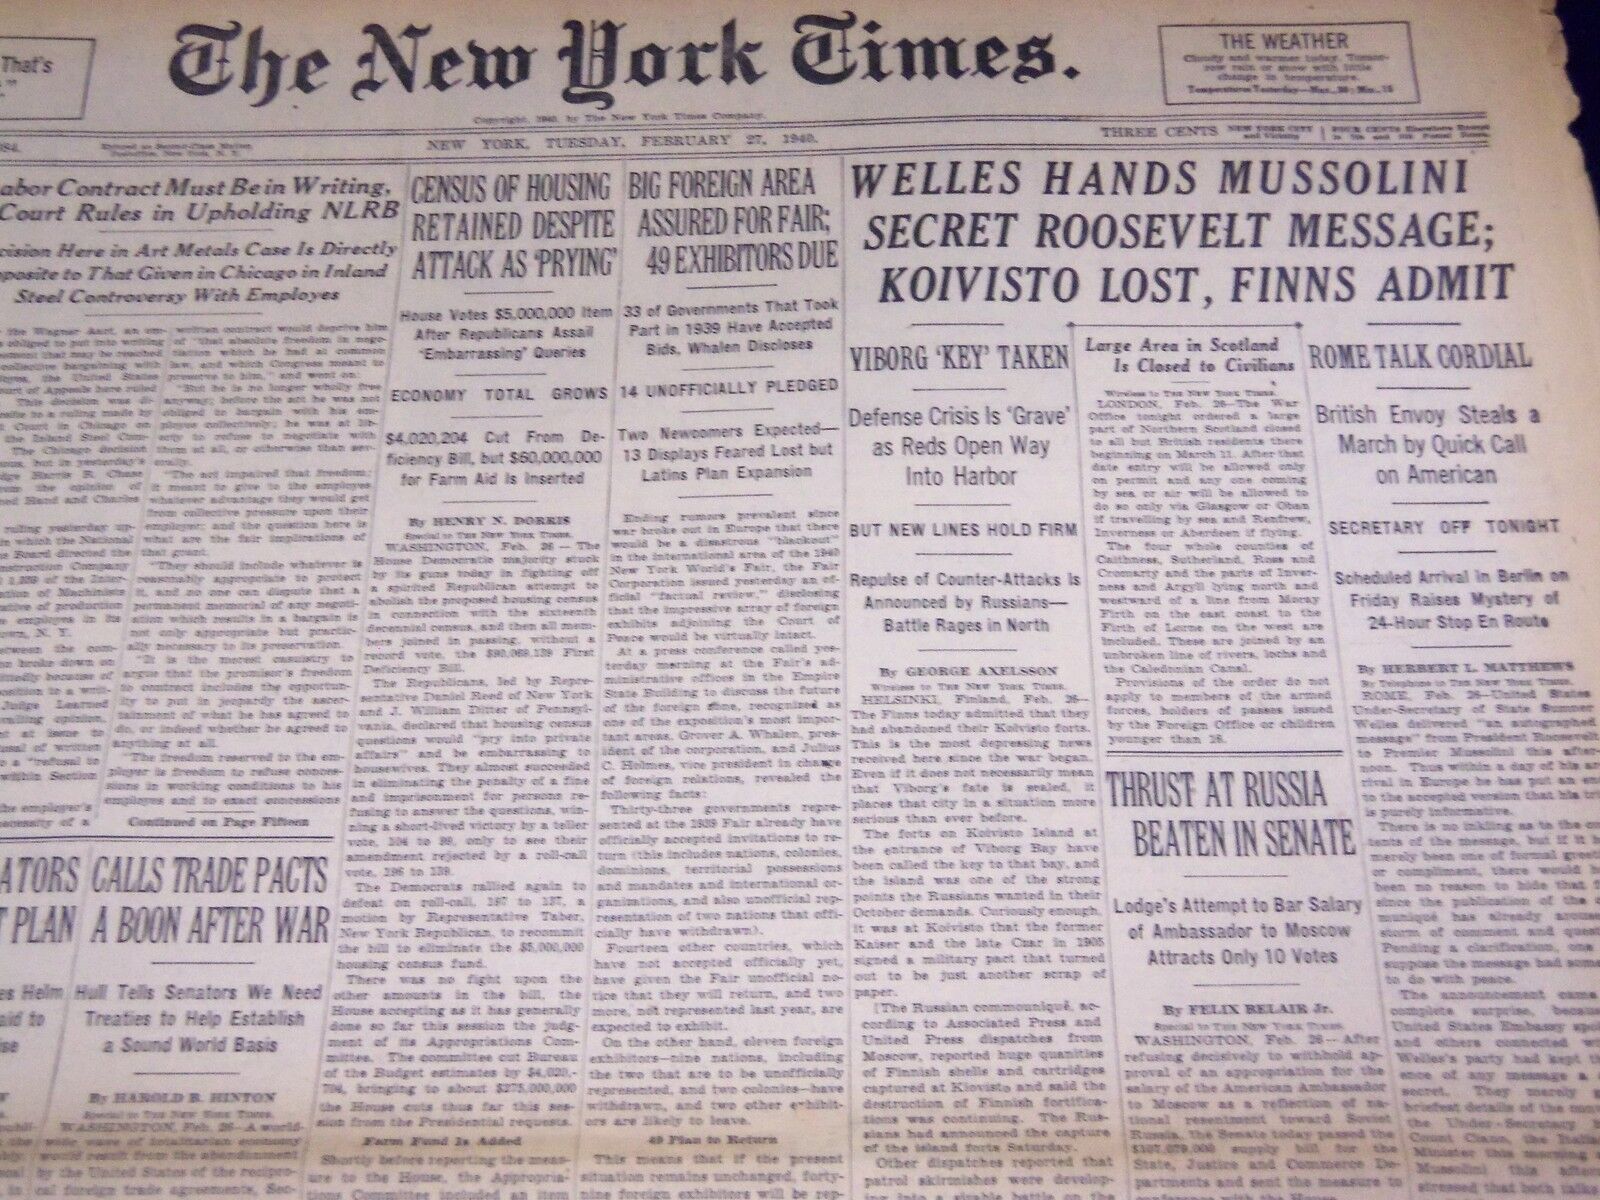 1940 FEBRUARY 27 NEW YORK TIMES - WELLES HANDS MUSSOLINI MESSAGE - NT 2940